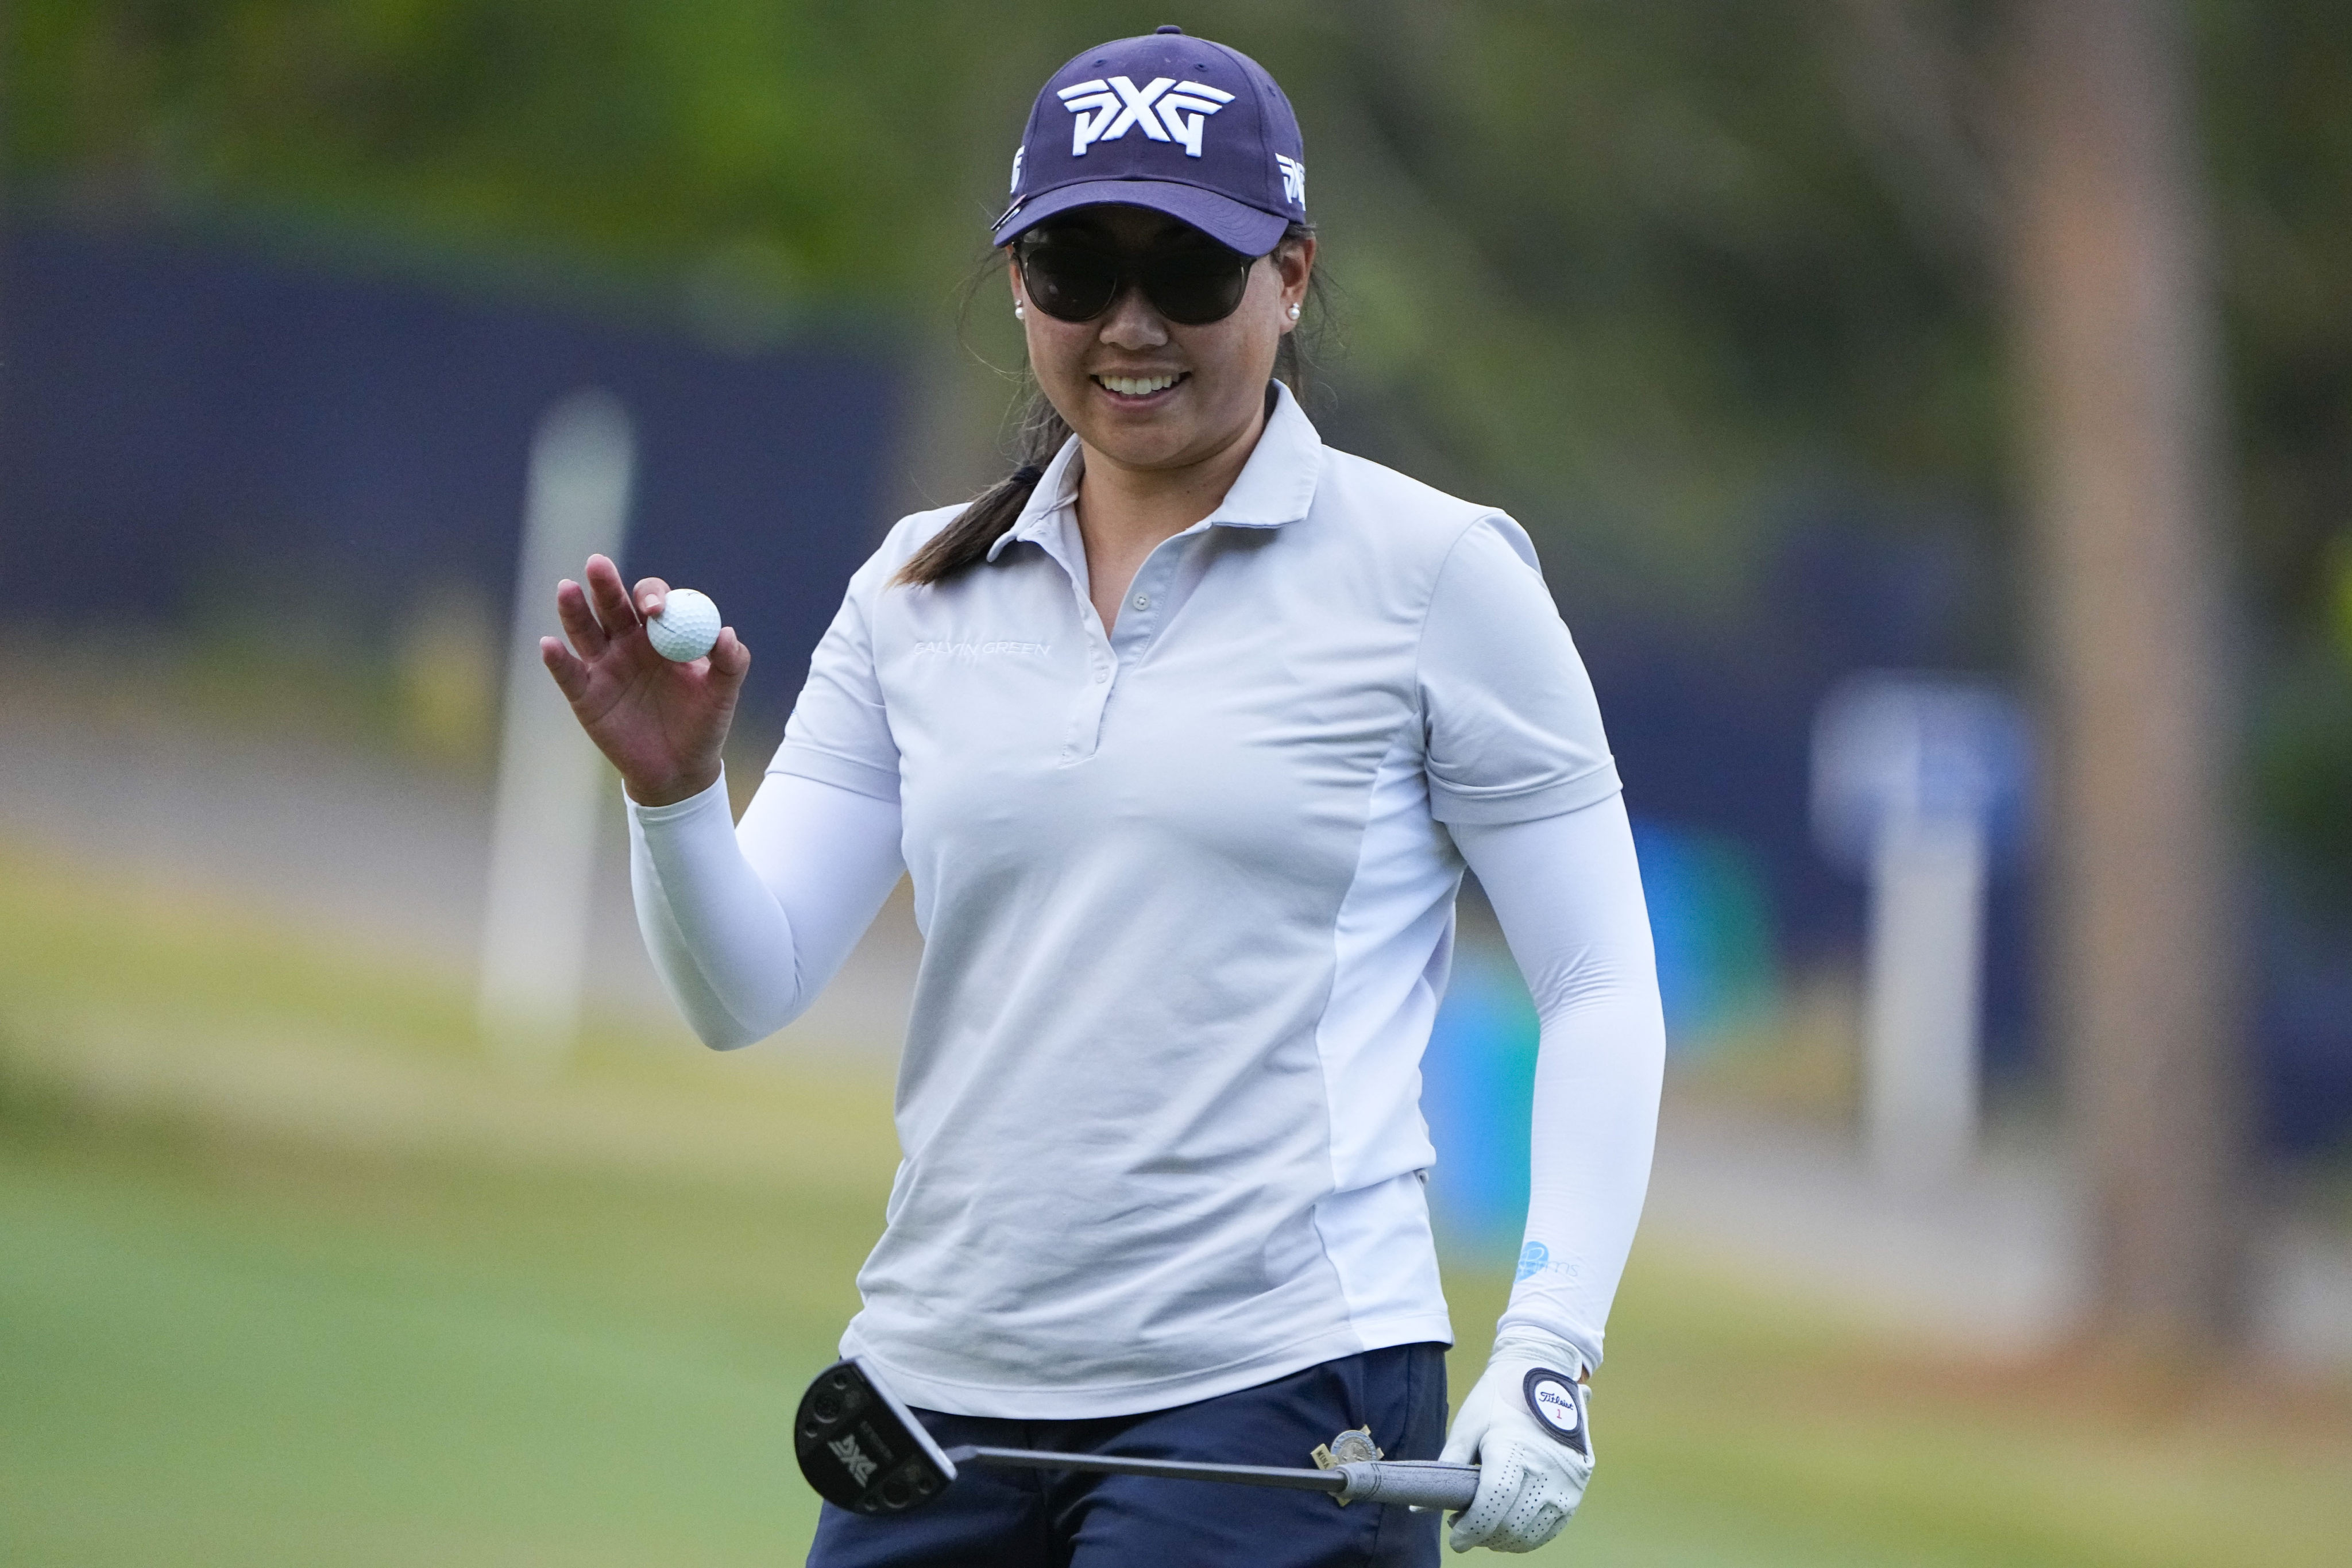 Mina Harigae smiles after saving par on the 18th during the first round of the US Women’s Open. Photo: AP